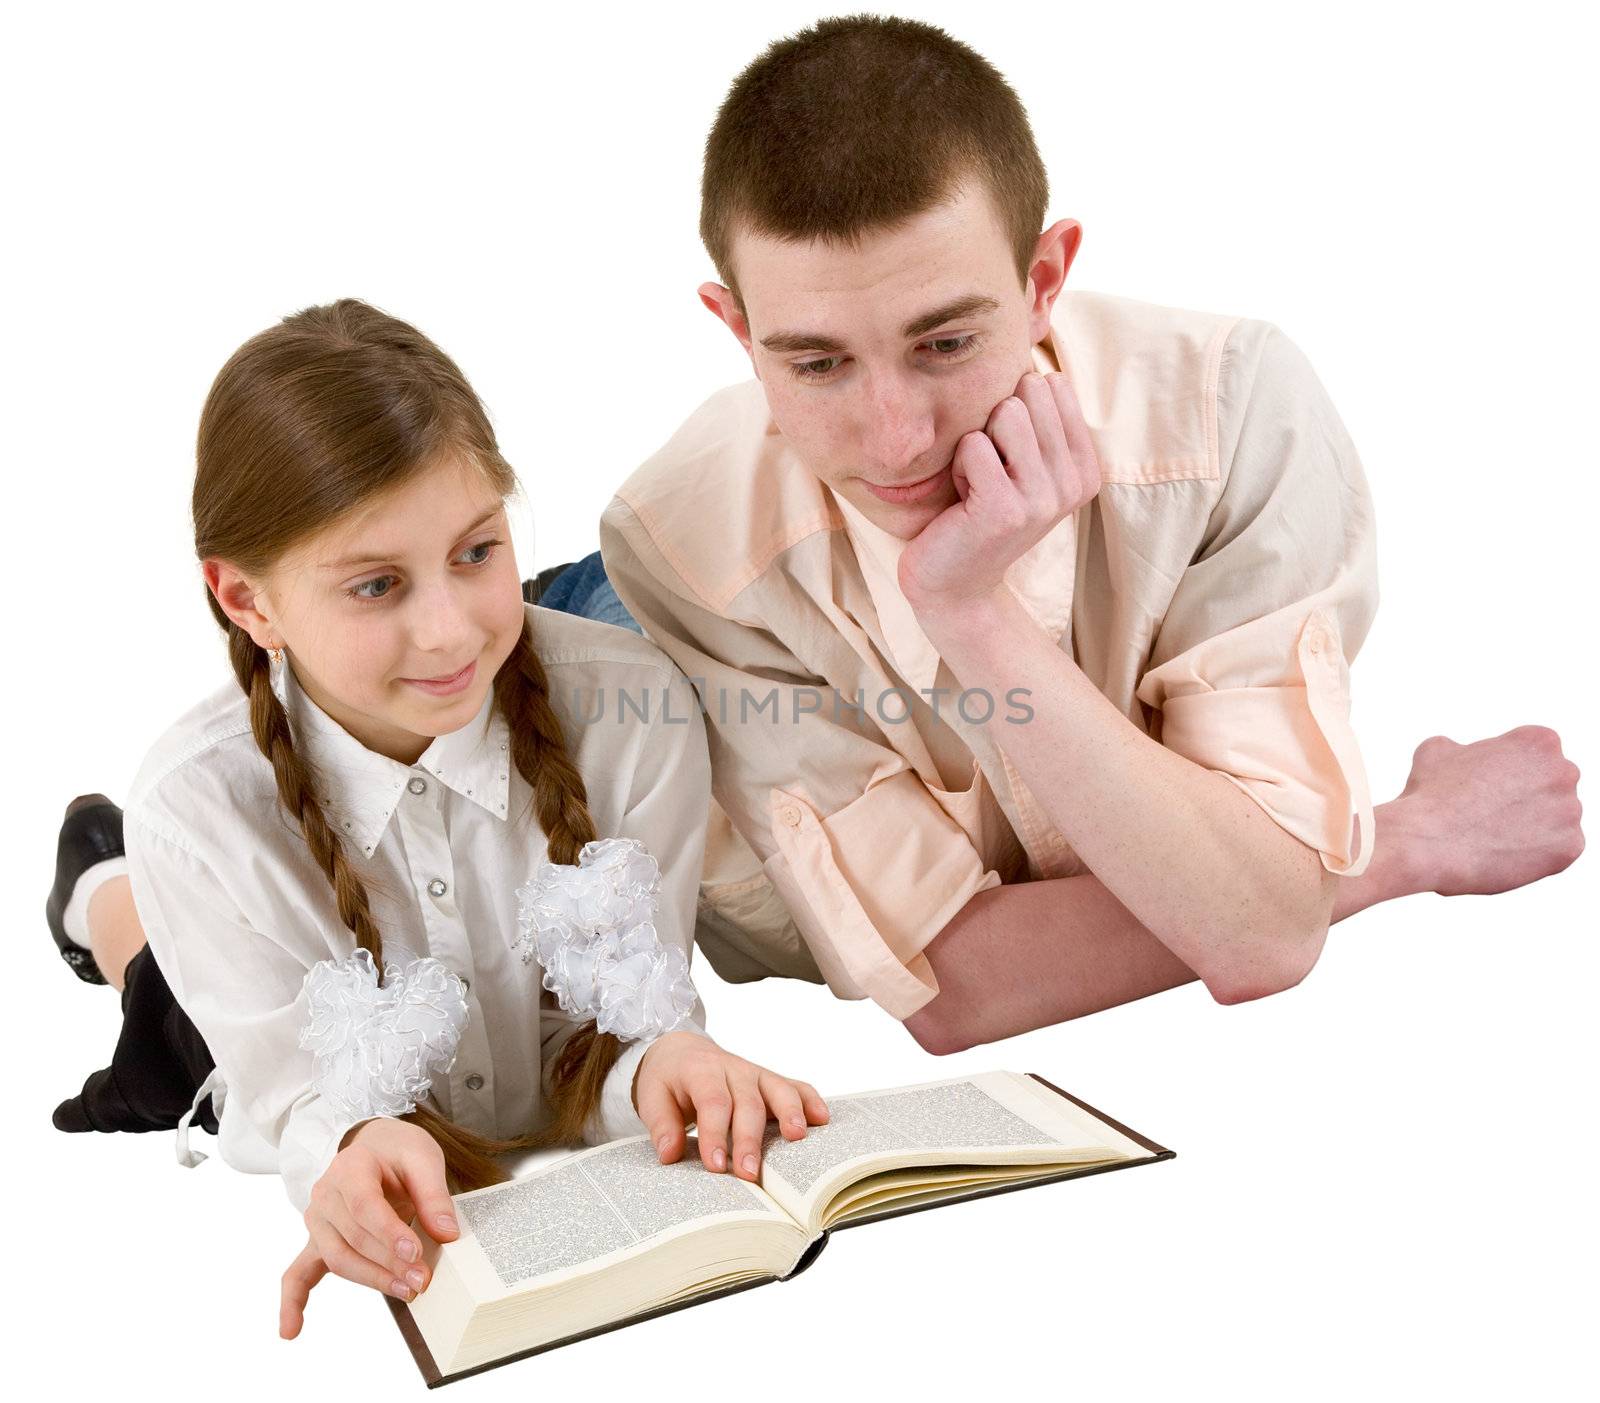 Girl and young man reading book in a reclining position by pzaxe